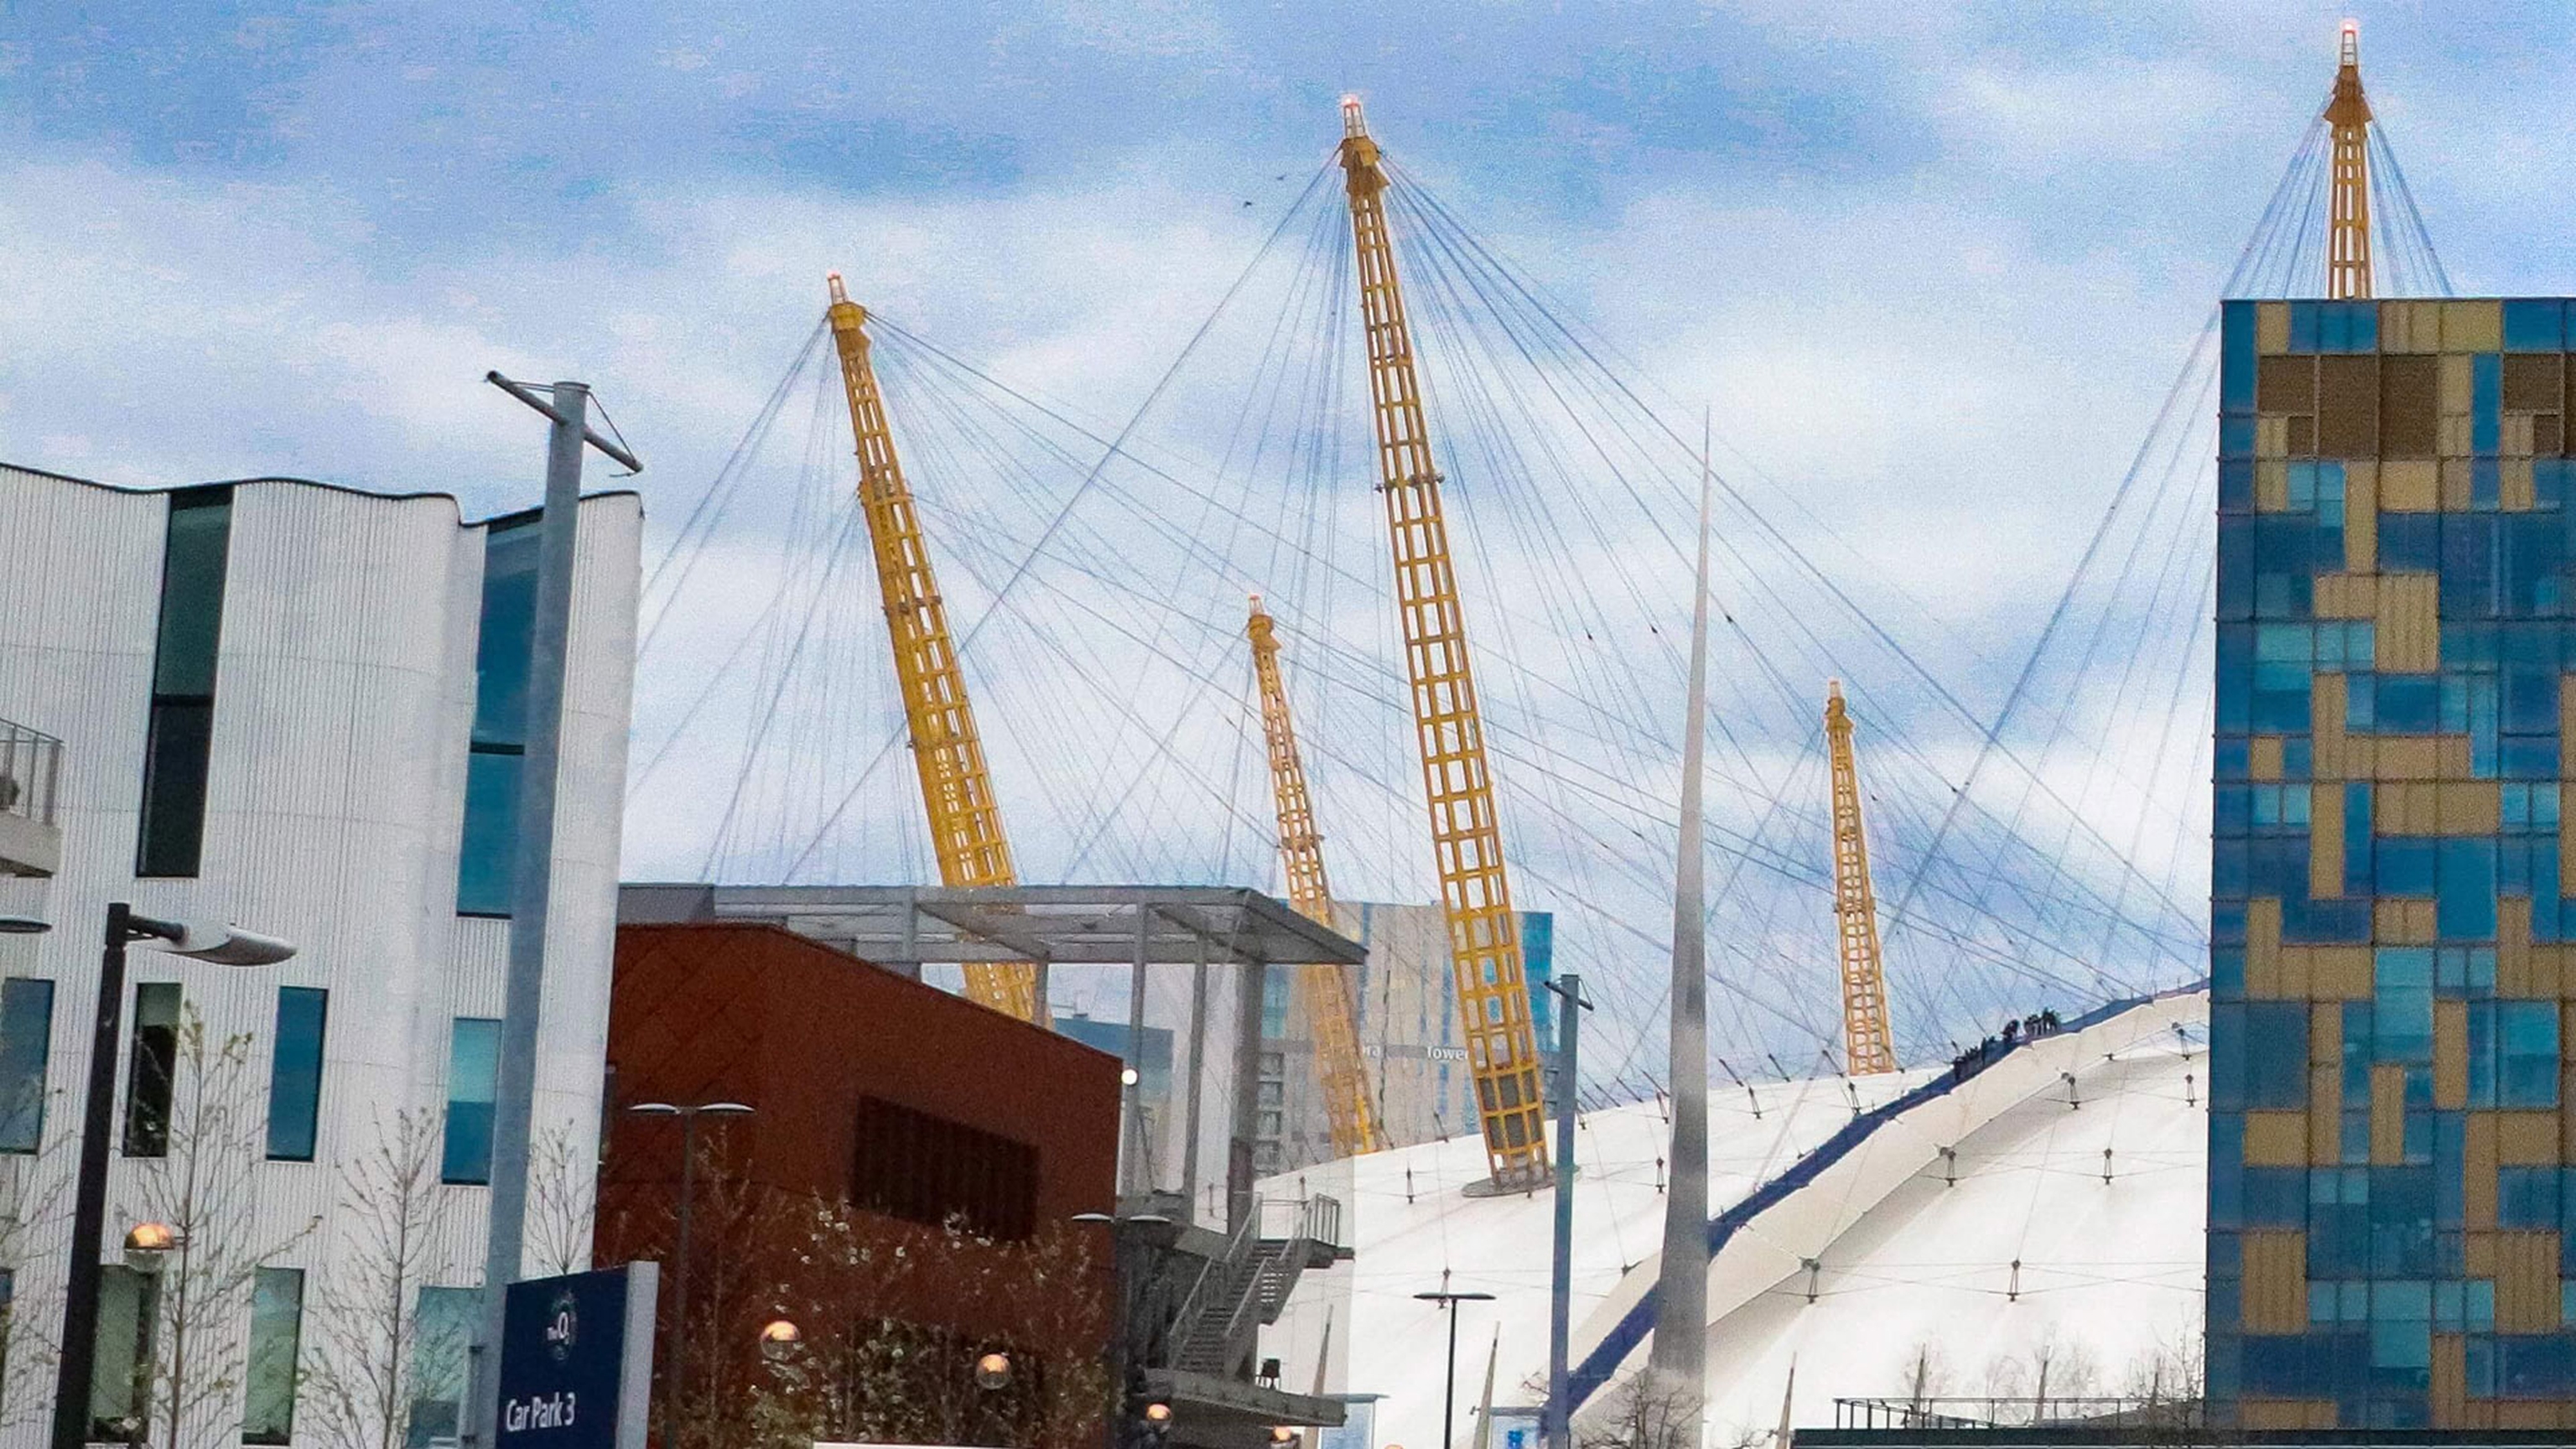 o2 arena and surrounding buildings on a sunny day